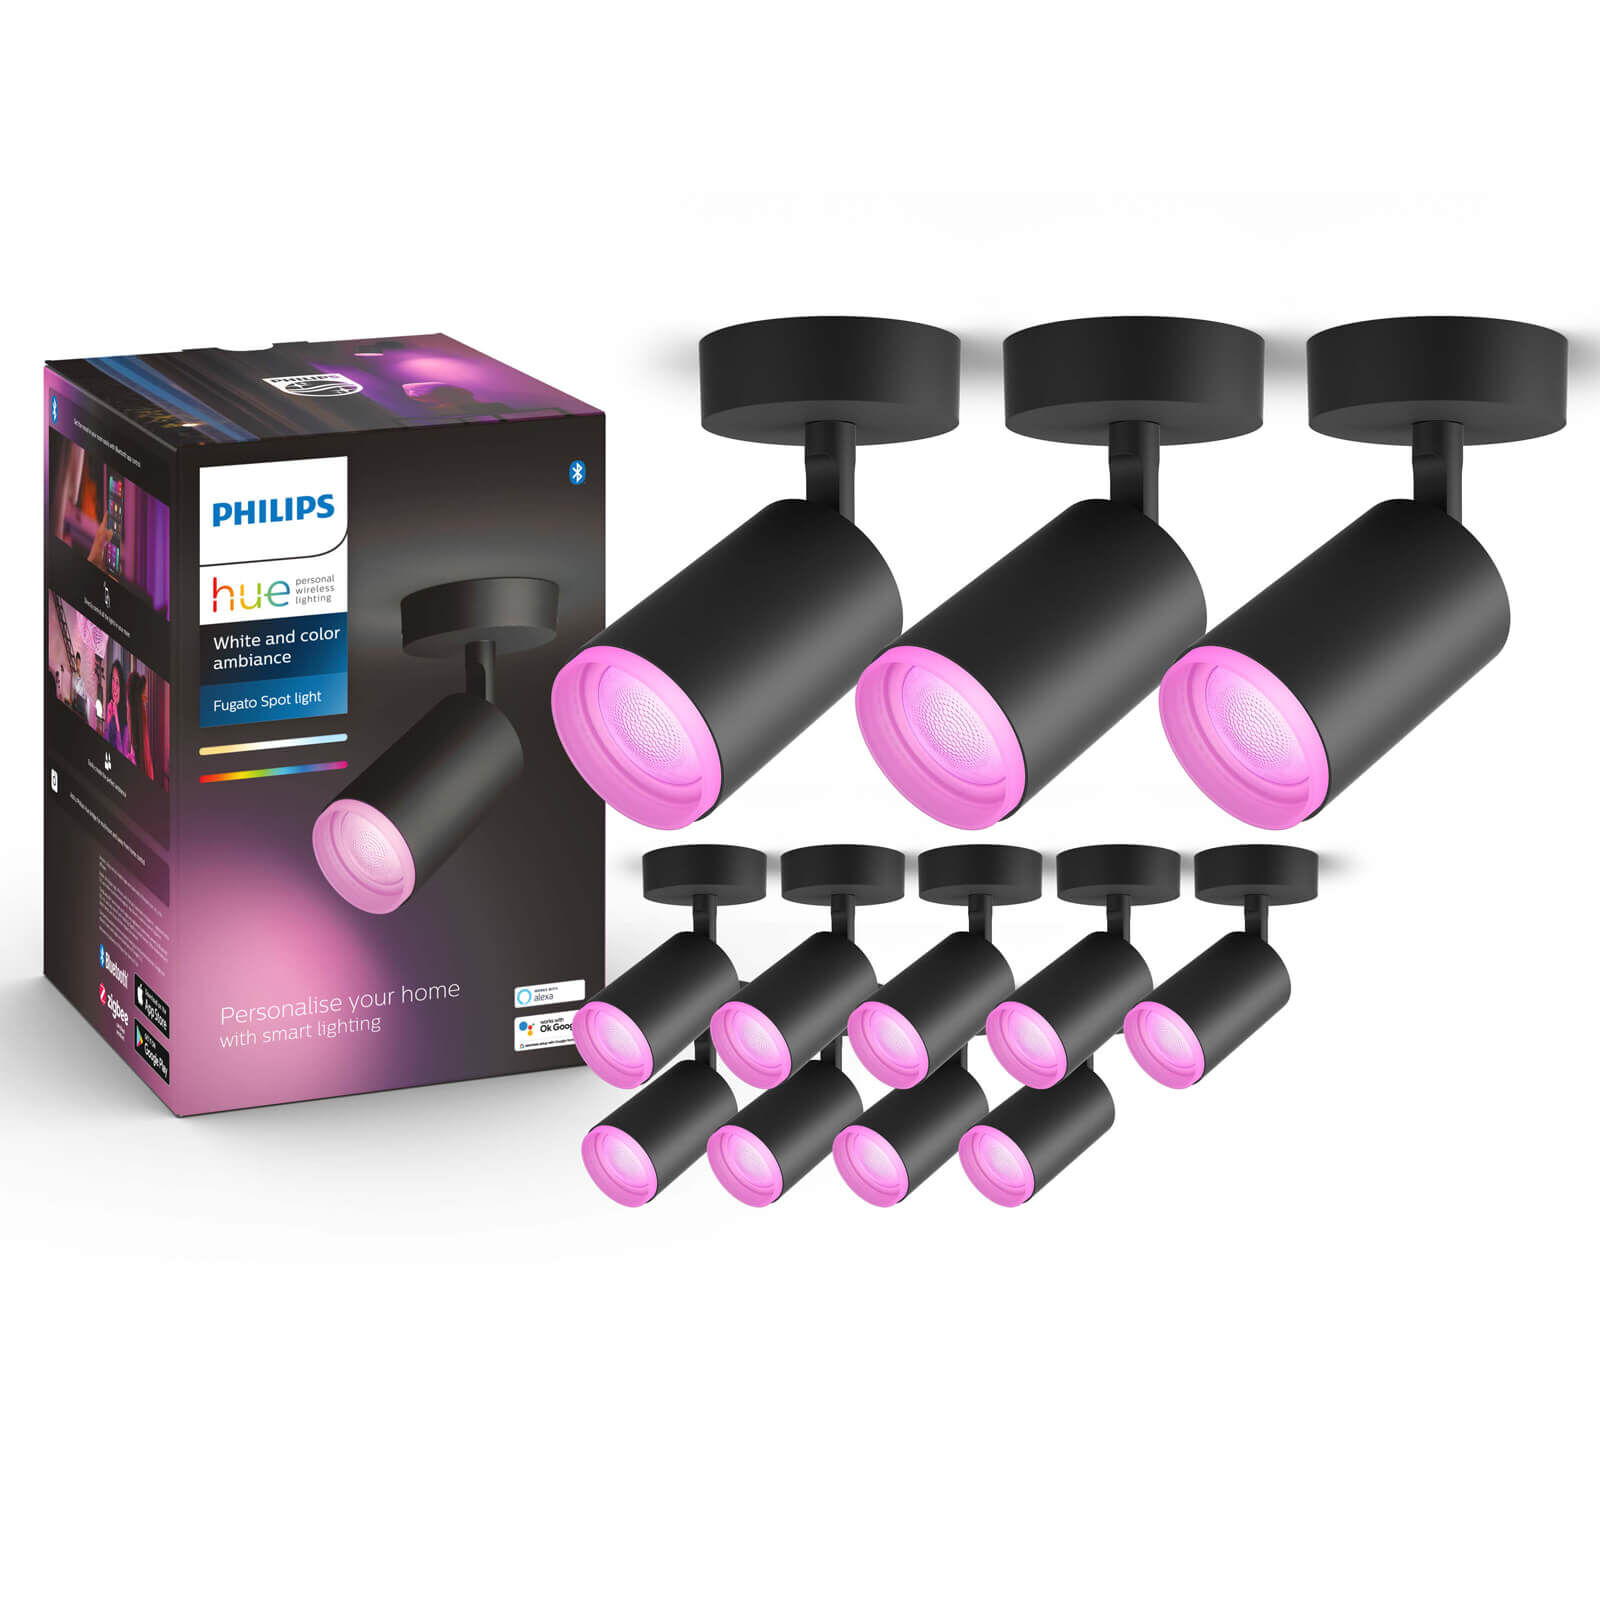 Philips Hue Fugato opbouwspot - White and Color - 1-spot zwart (12-pack)